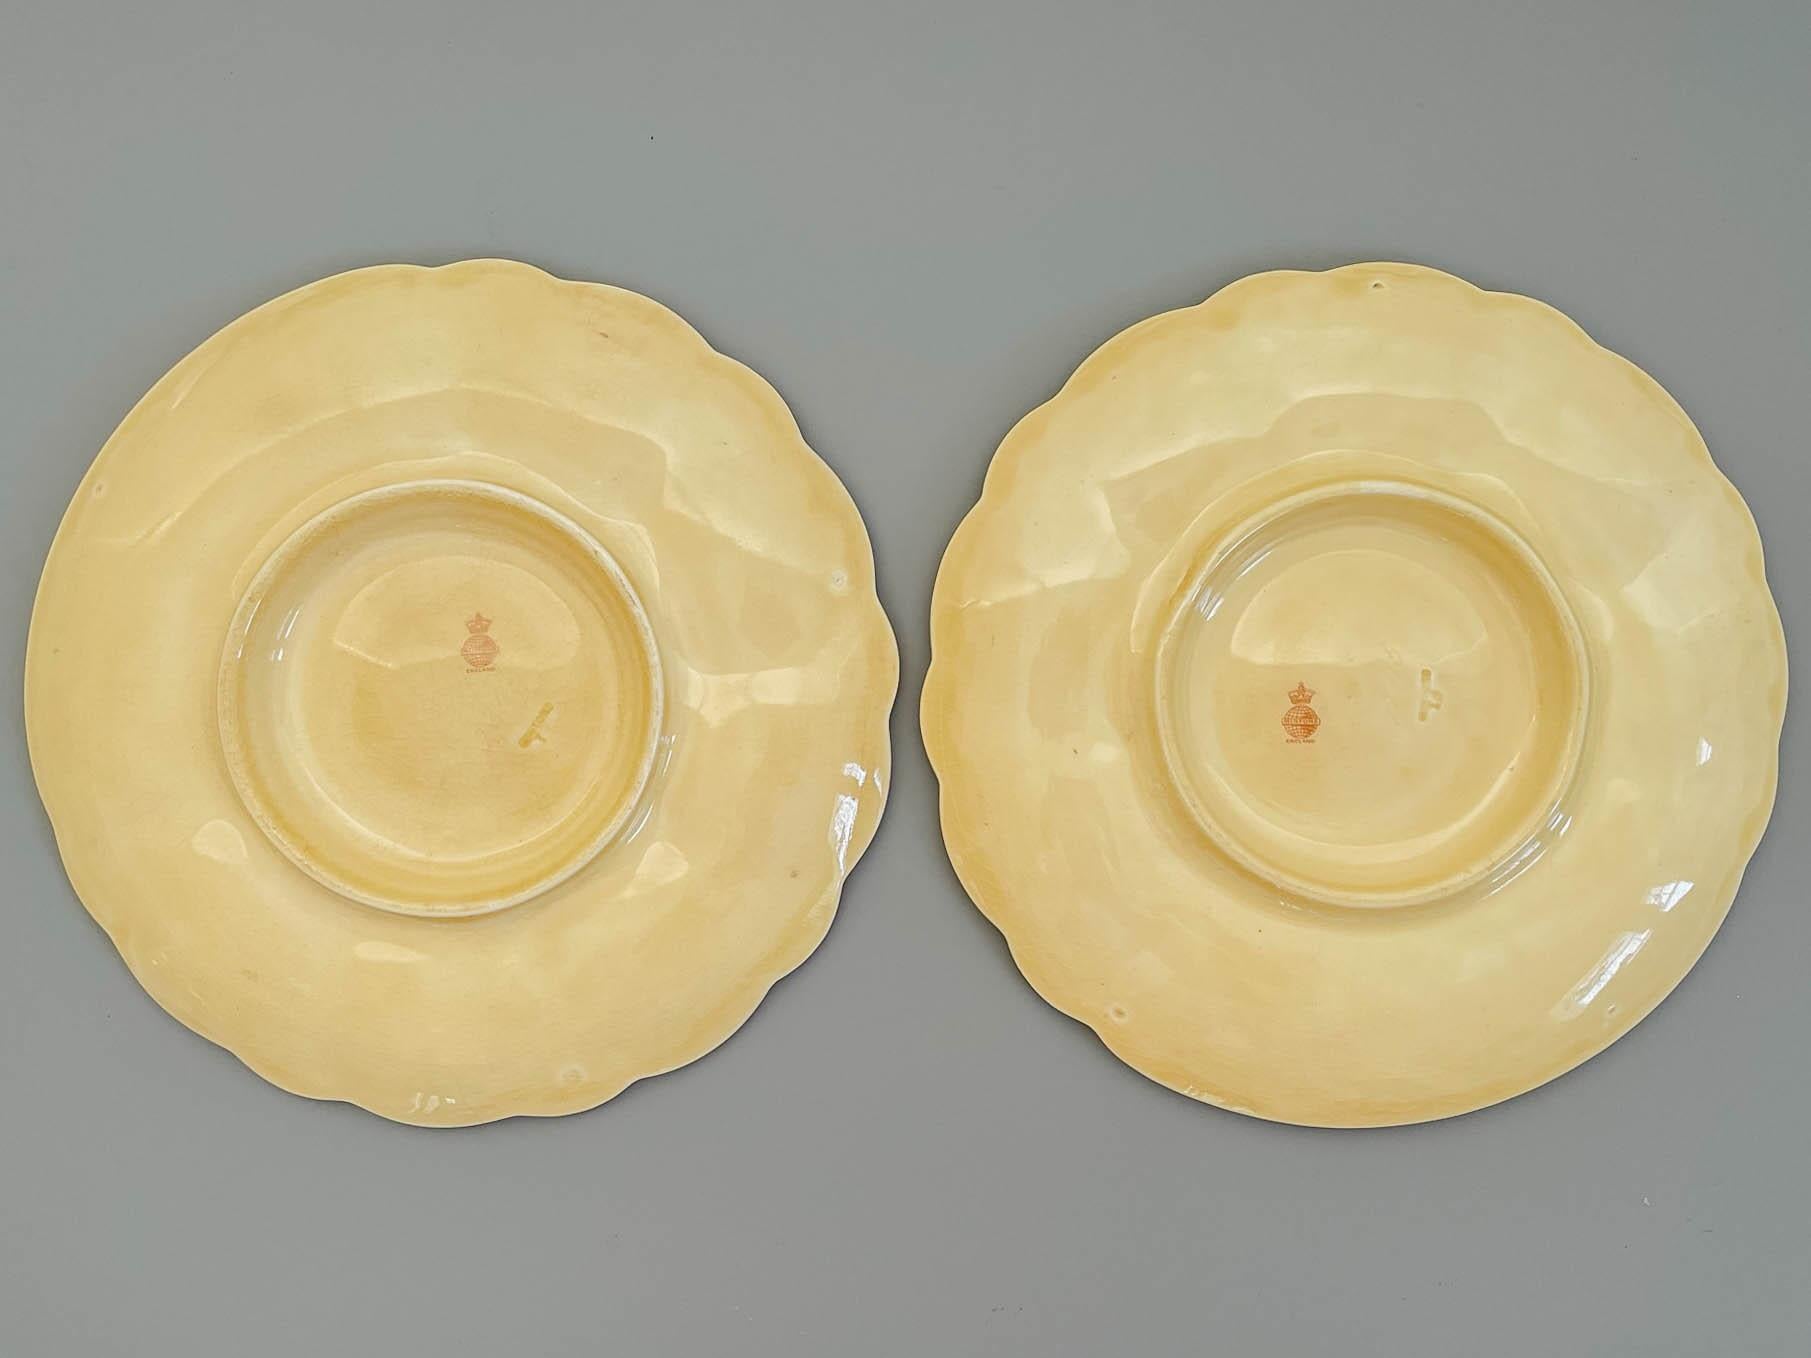 19th Century English Minton Majolica Oyster Plates Pair In Good Condition For Sale In Winter Park, FL